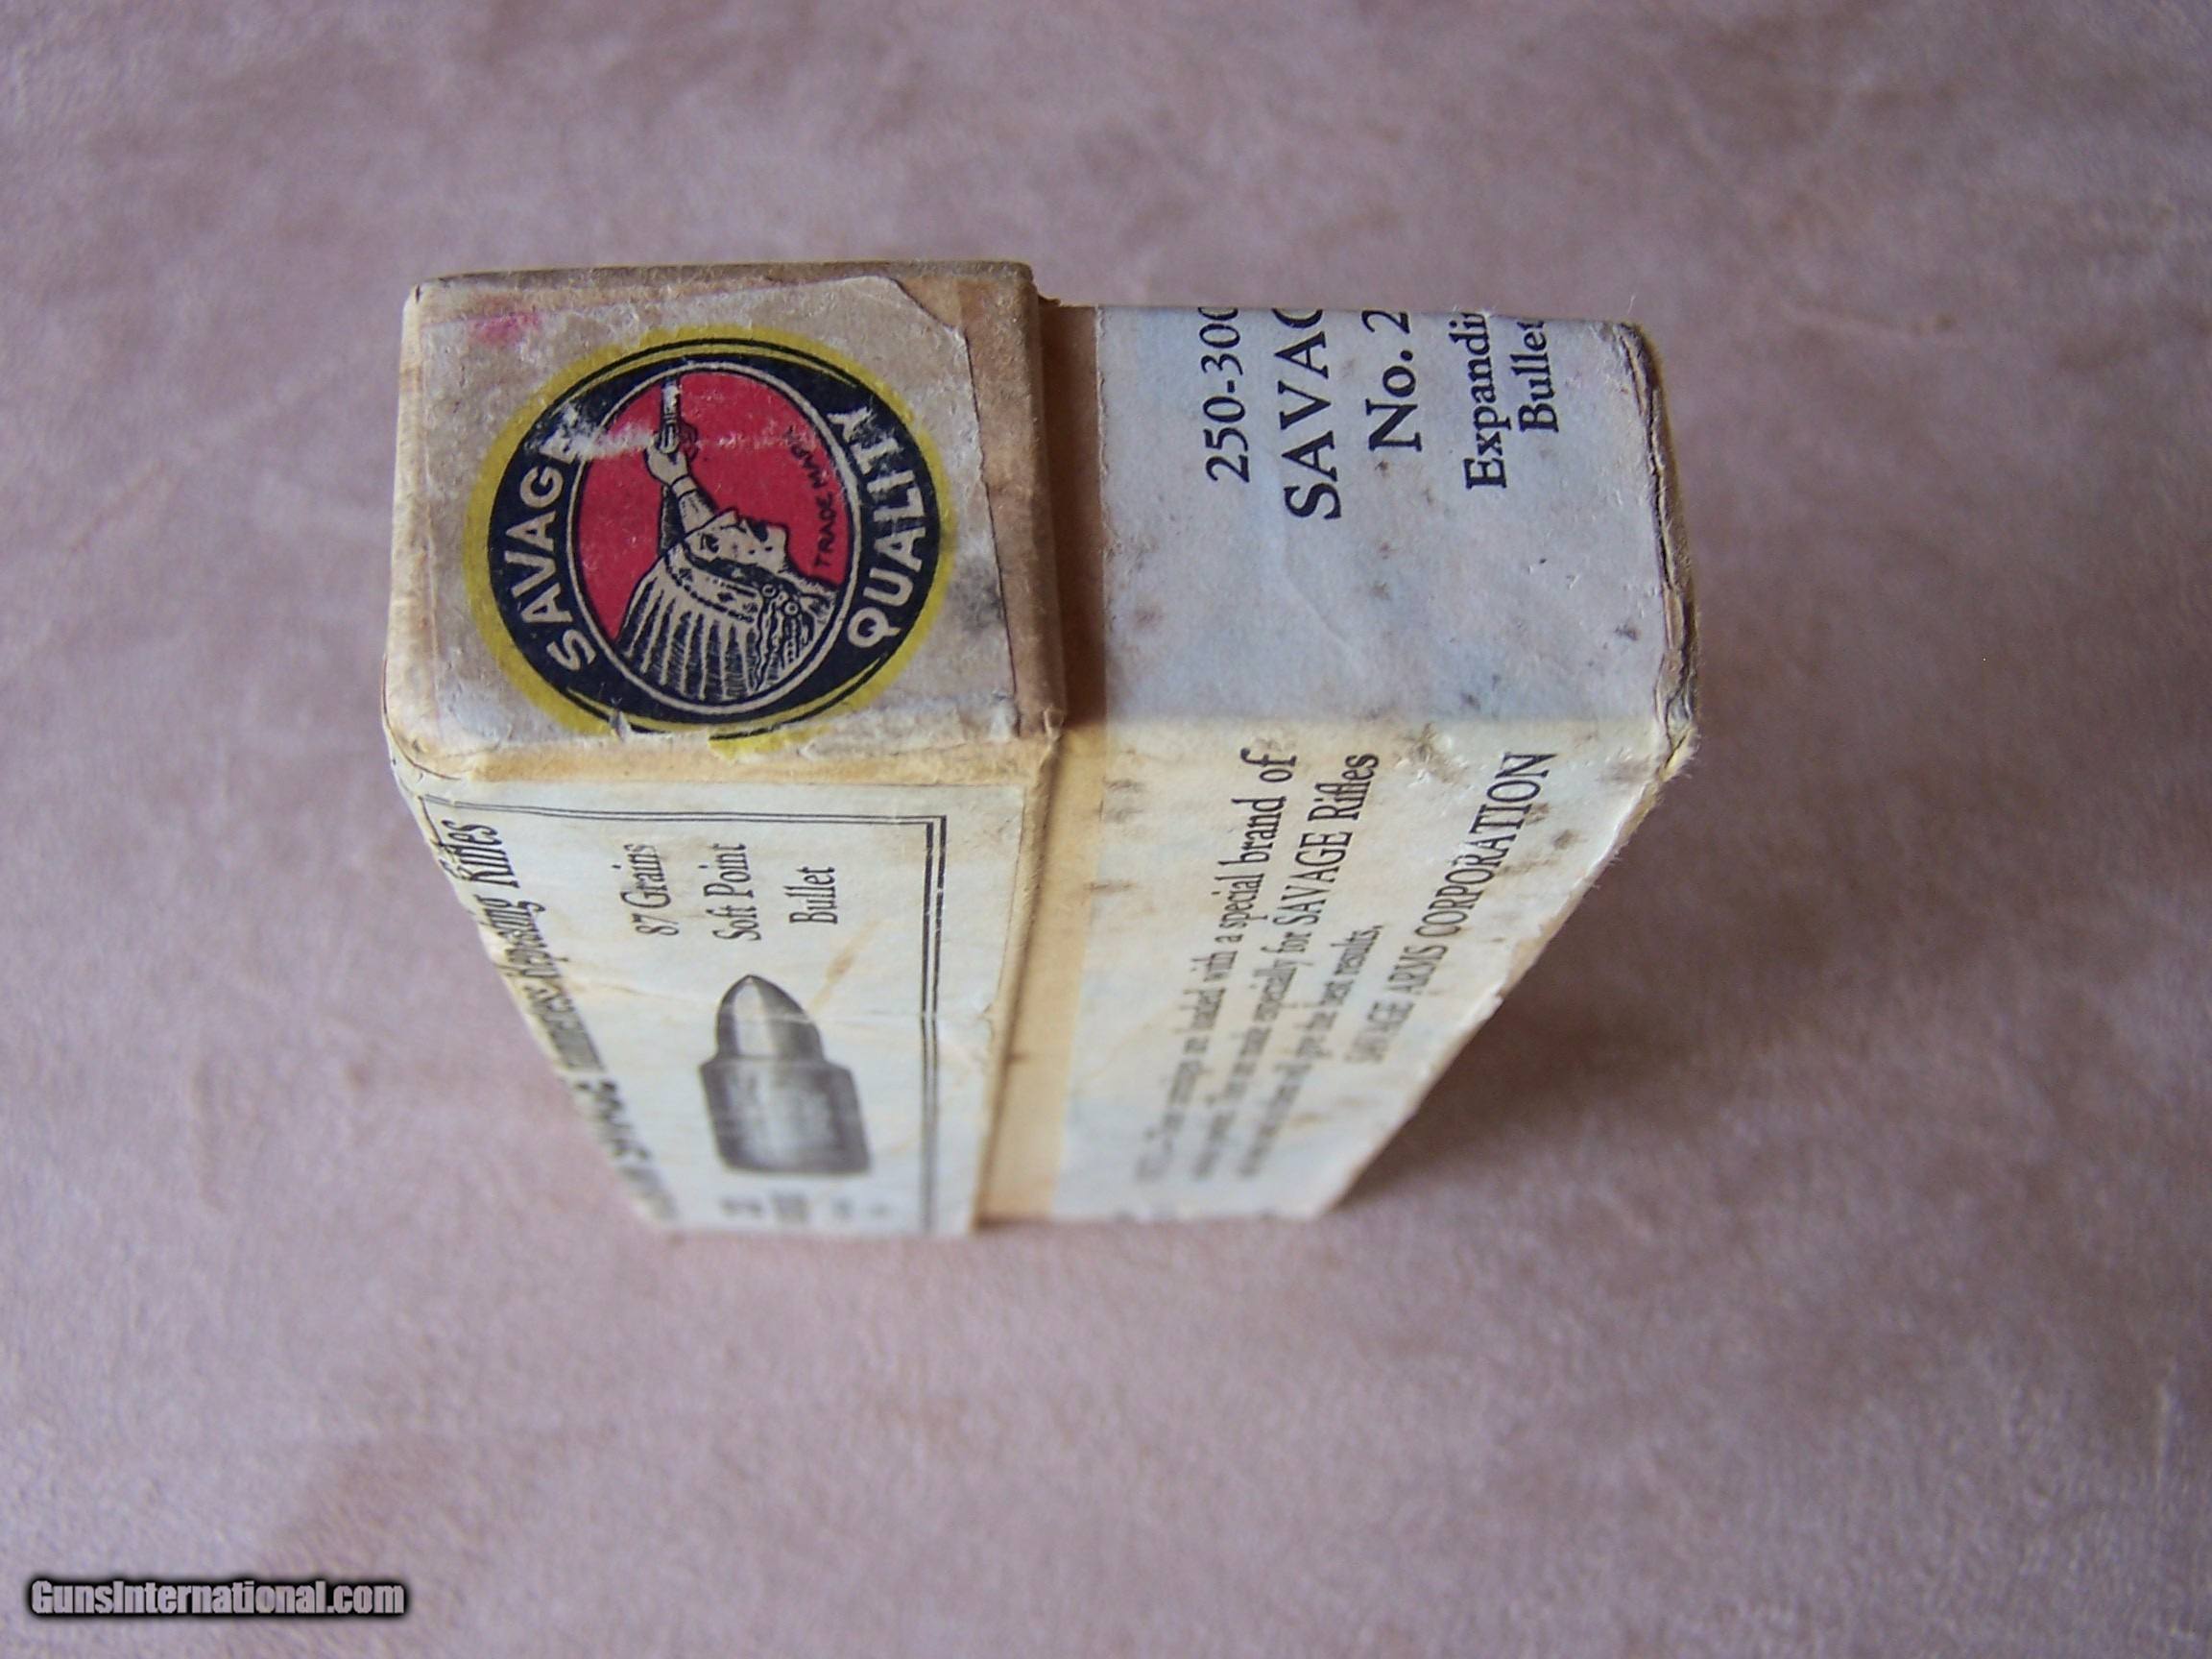 Savage Original Early Sealed Box of .250-3000 Ammo Rare Find, Very ...